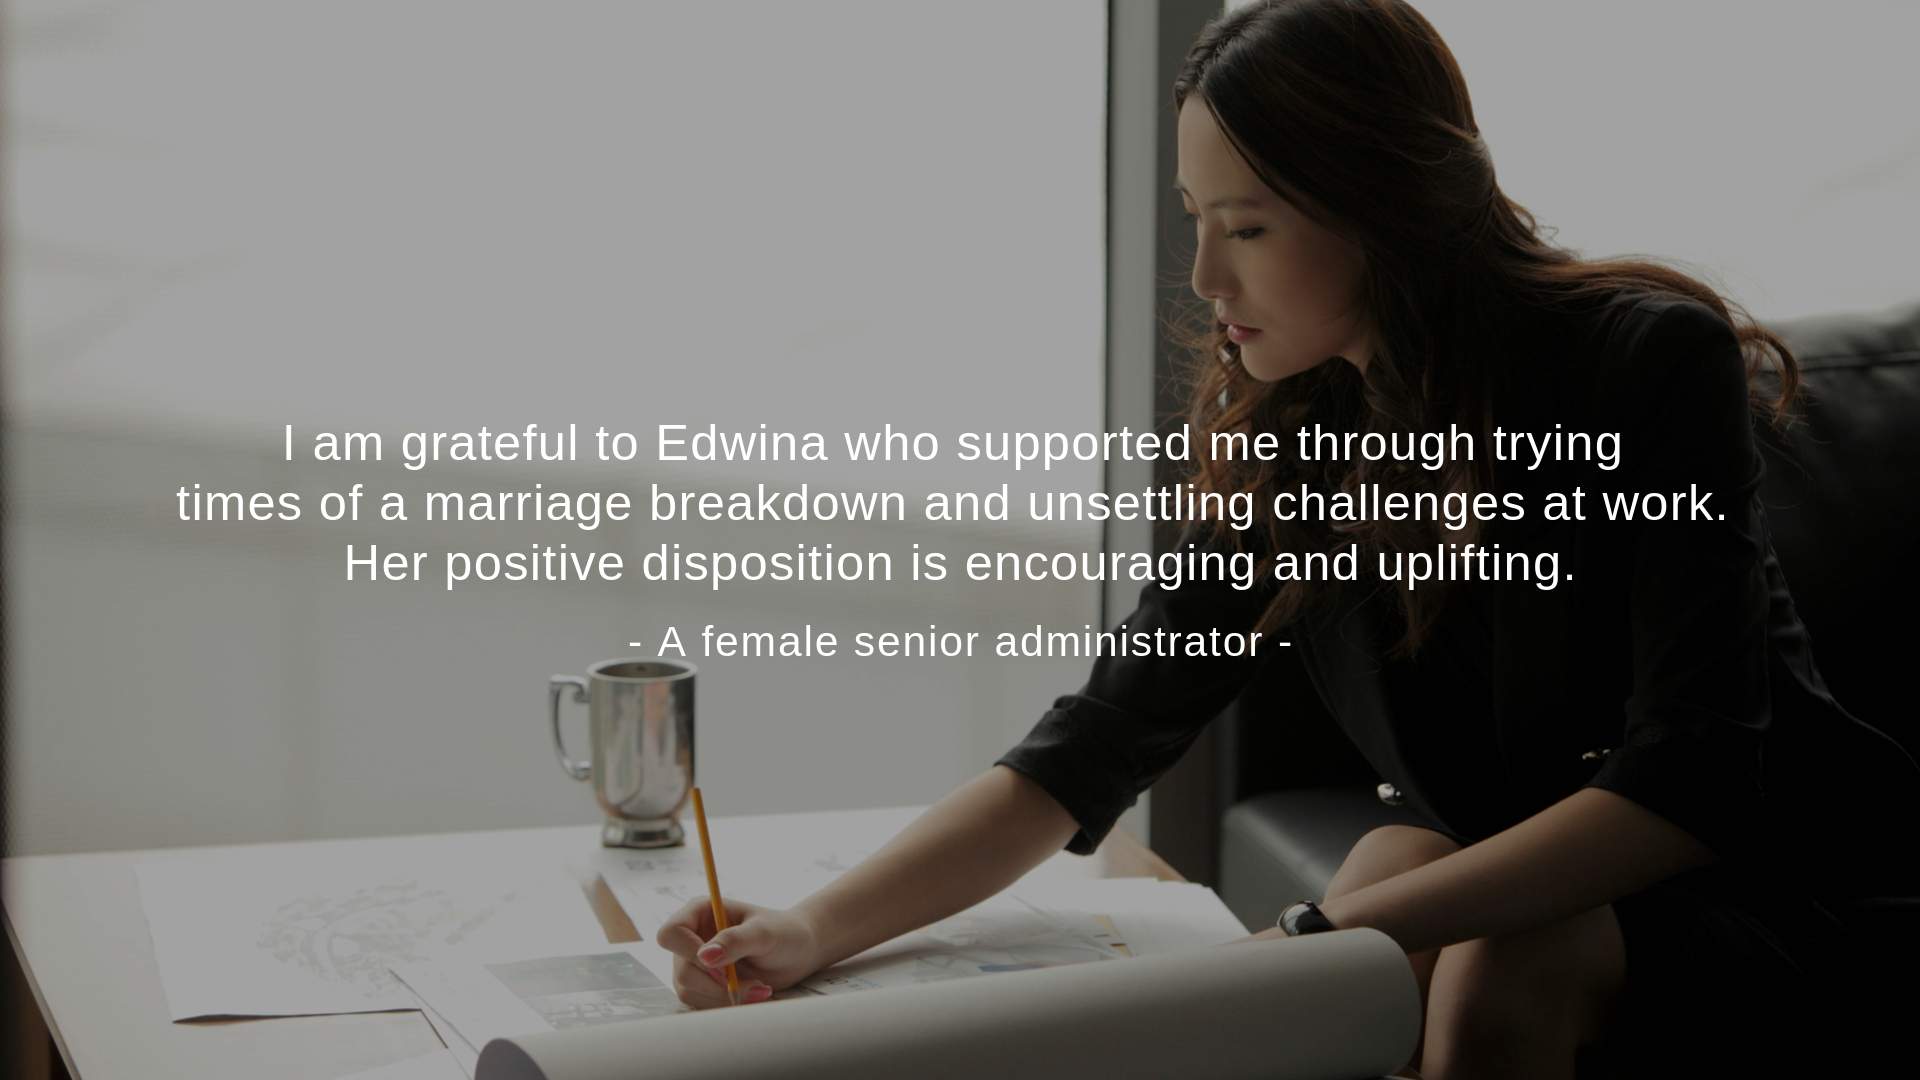 "Her positive disposition is encouraging and uplifting," a female senior administrator said.